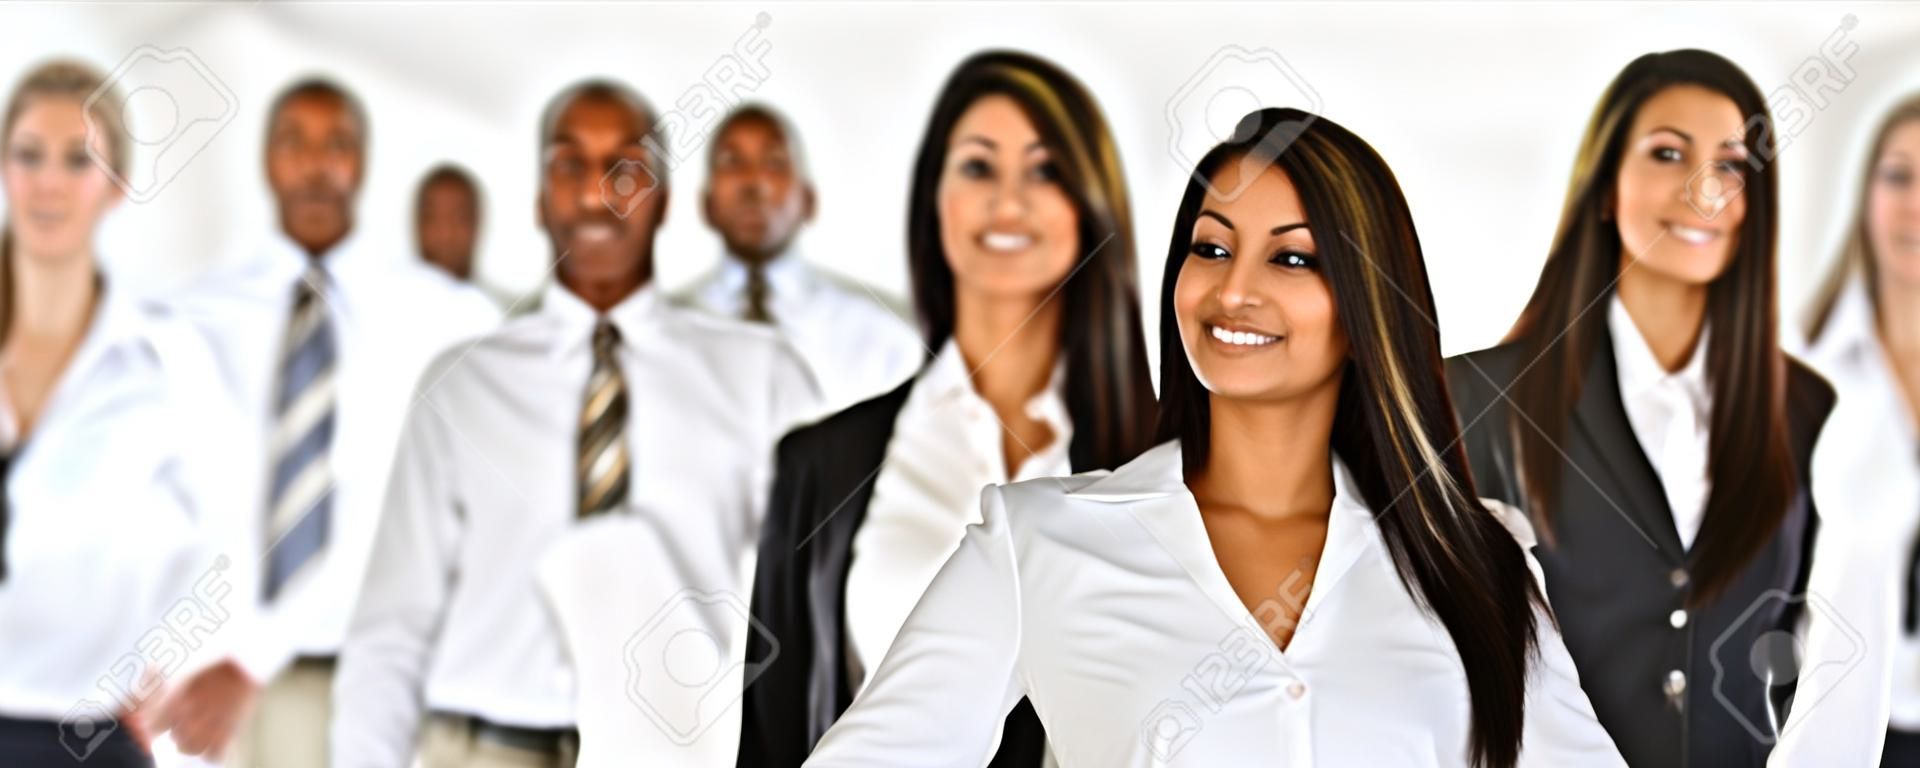 Businesswoman selecting members of her business team